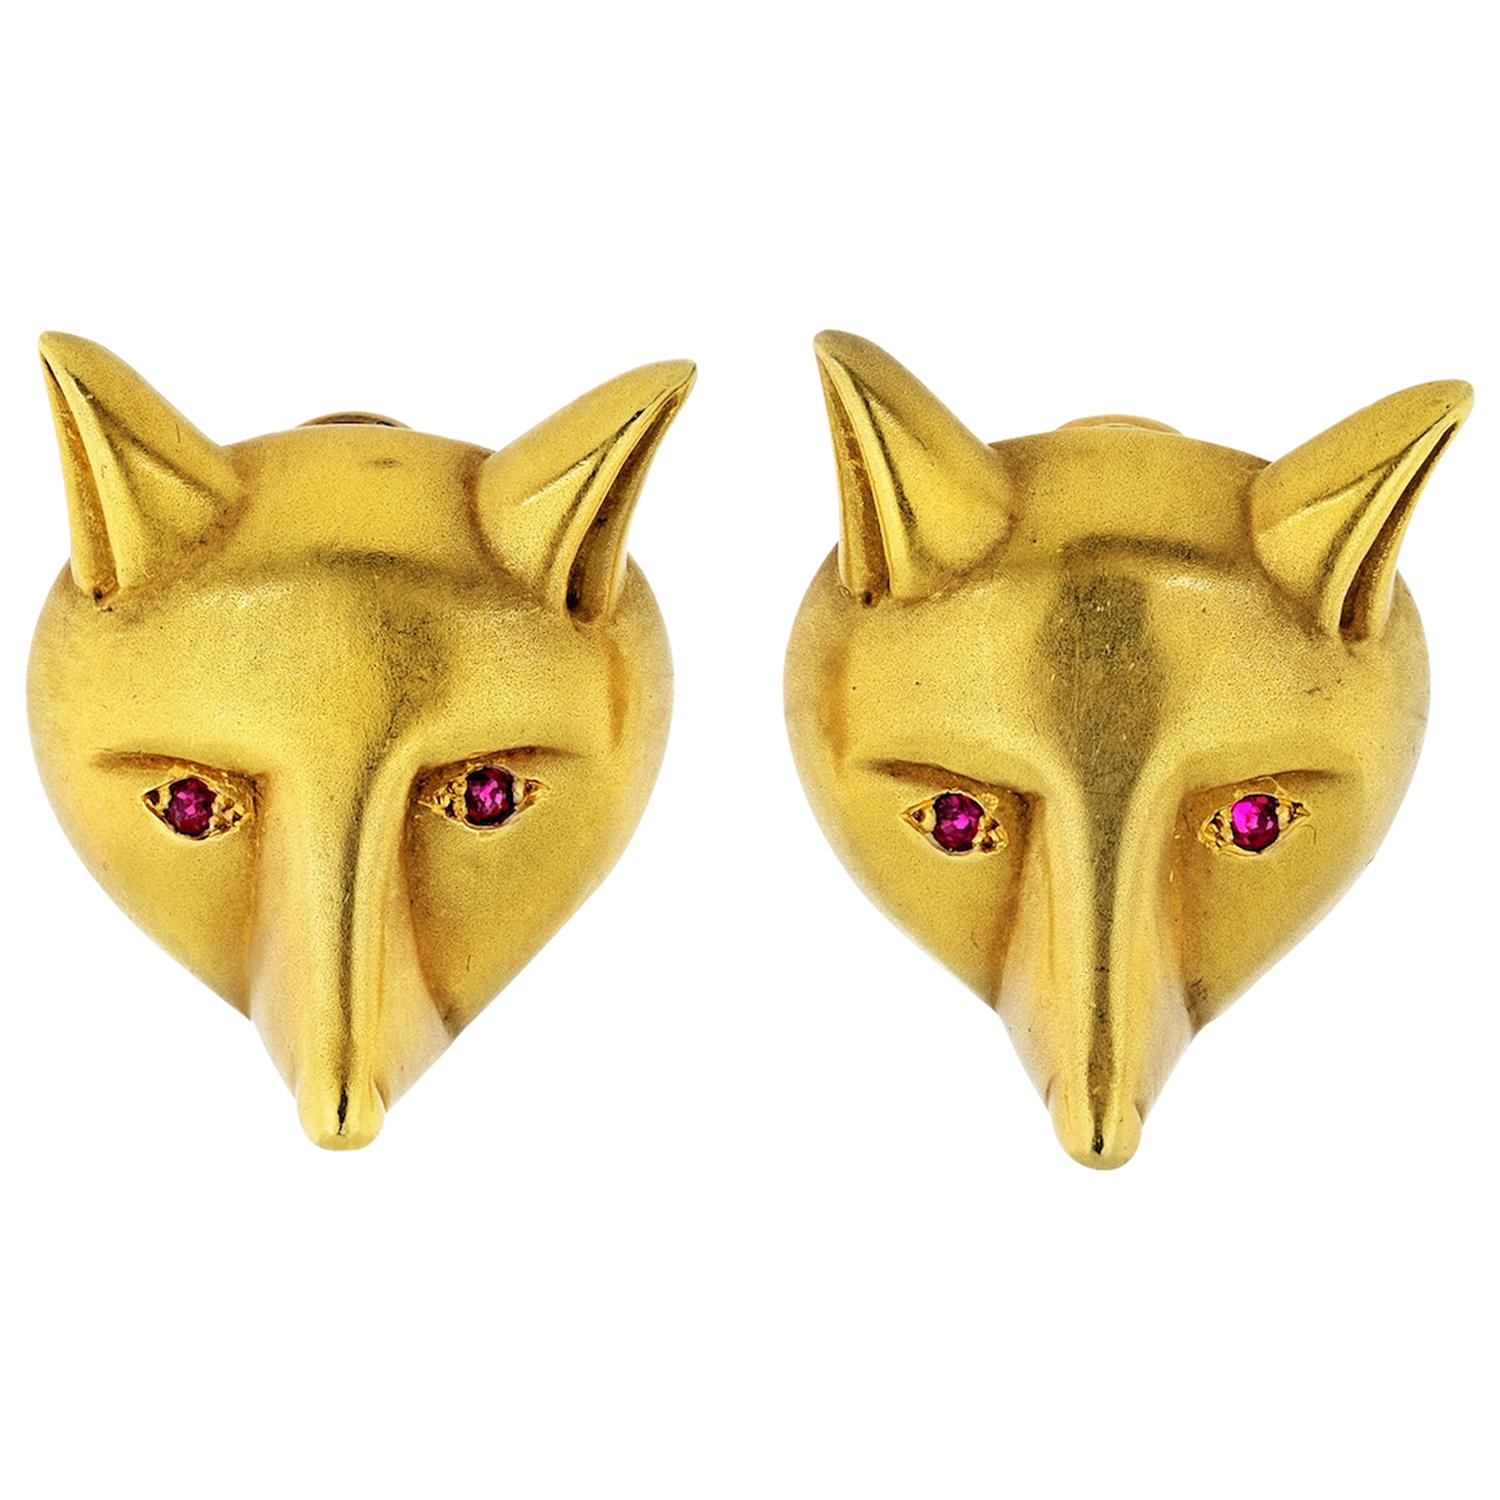 KIESELSTEIN-CORD GOLD EARRINGS
Each designed as a stylized fox head with a matte finish
Signature: Kieselstein Cord
Marks: 1986 18K with maker's mark.
Clip-on closure.
L: 30mm